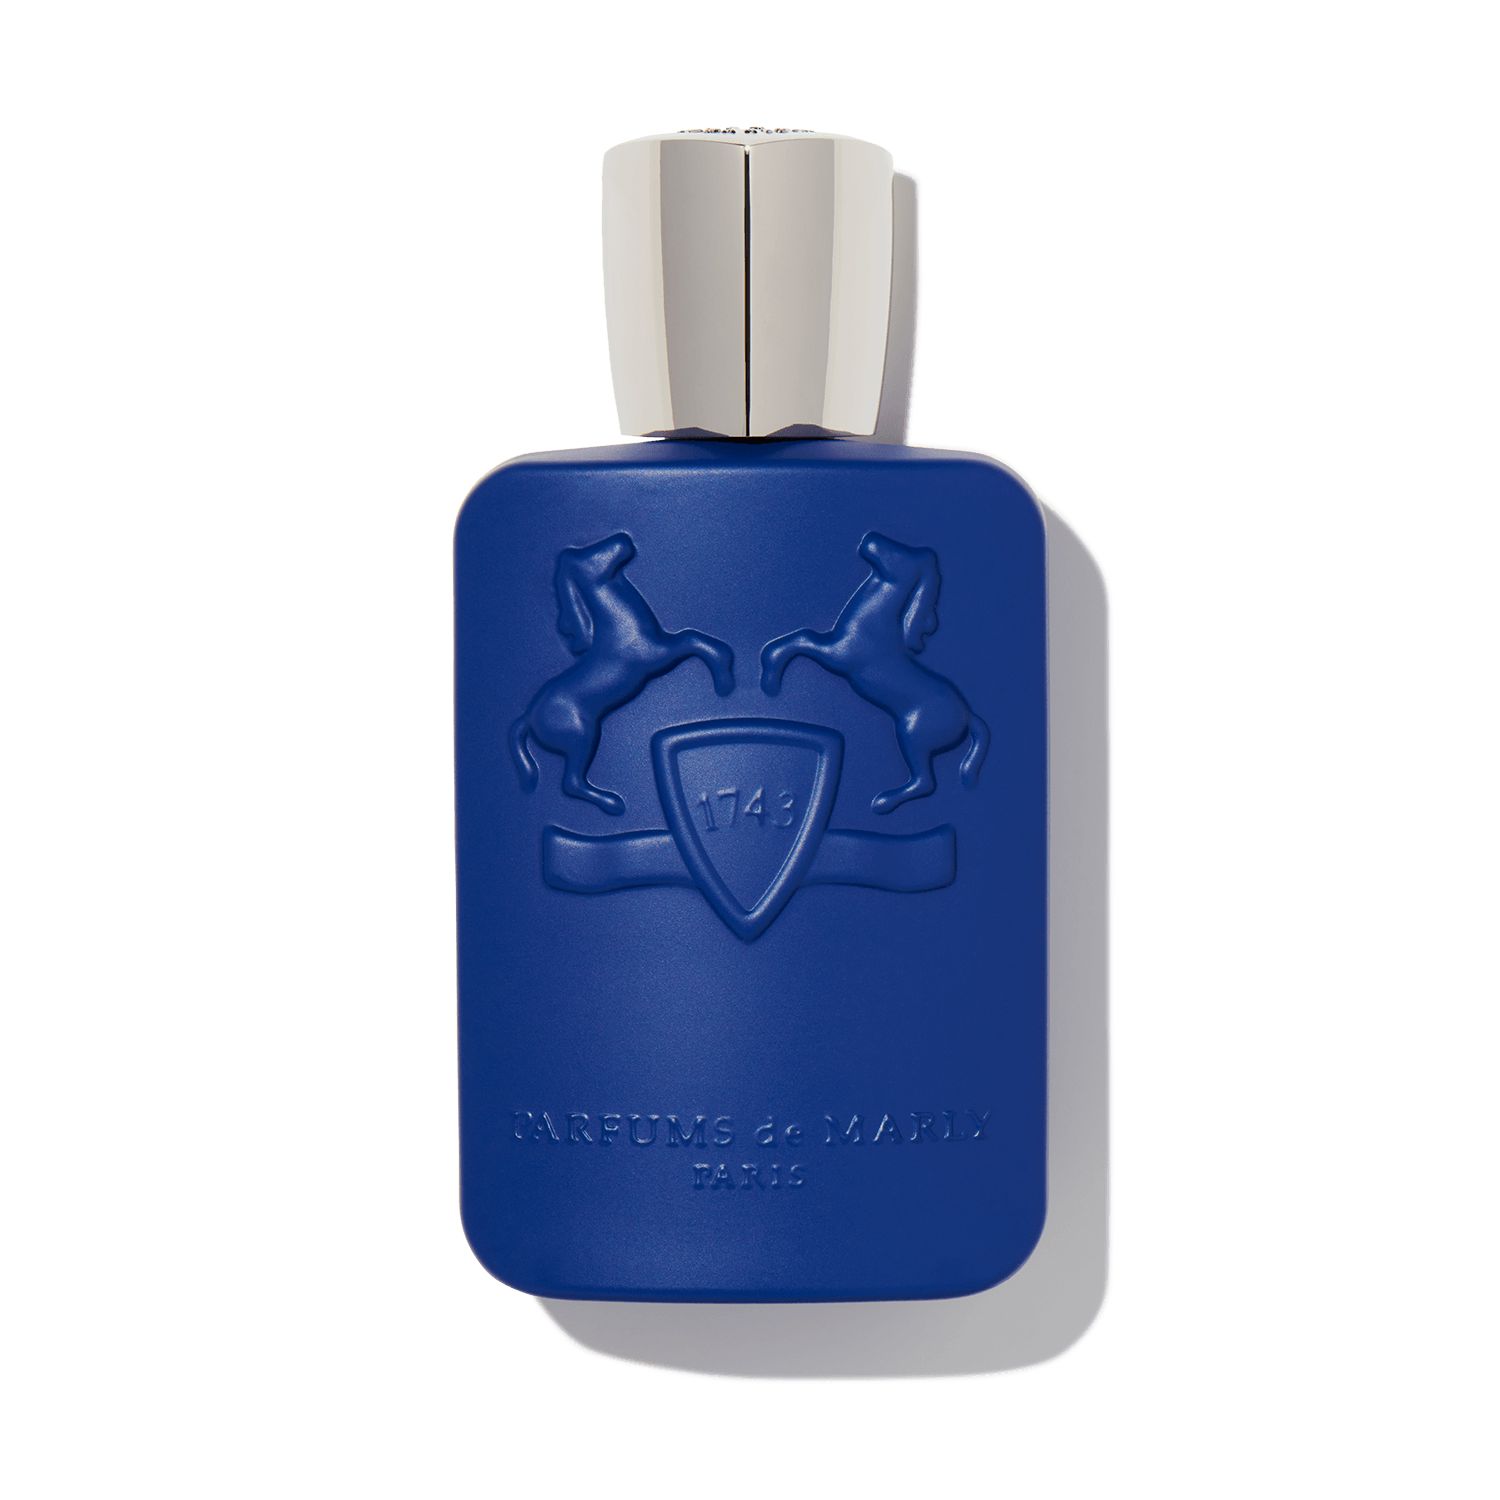 Buy PARFUMS DE MARLY Percival at Scentbird for $16.95